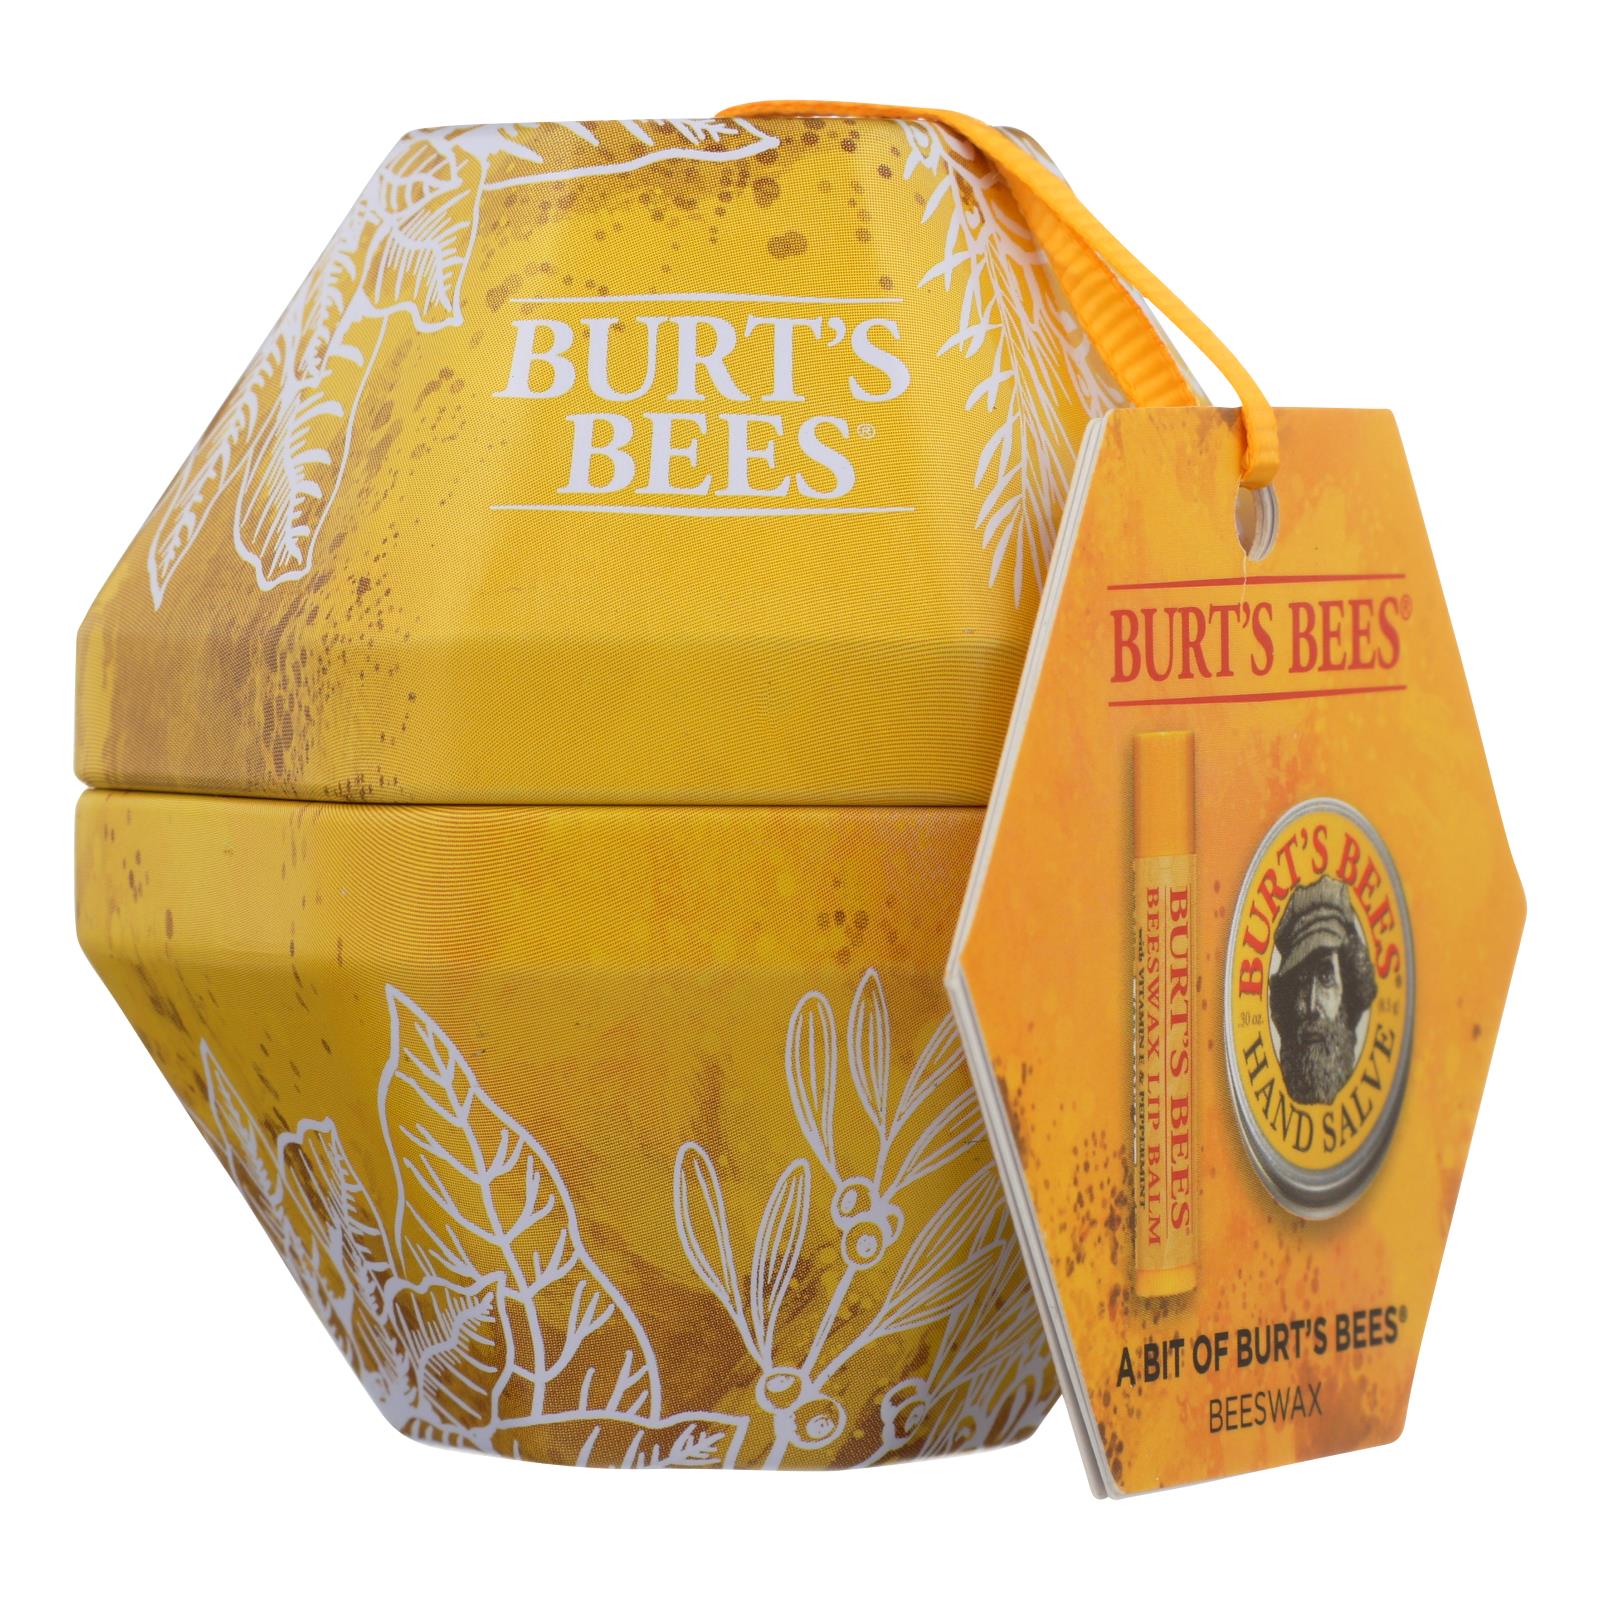 Burts Bees - Gift Pack Beeswax - Case of 5 - 1 CT